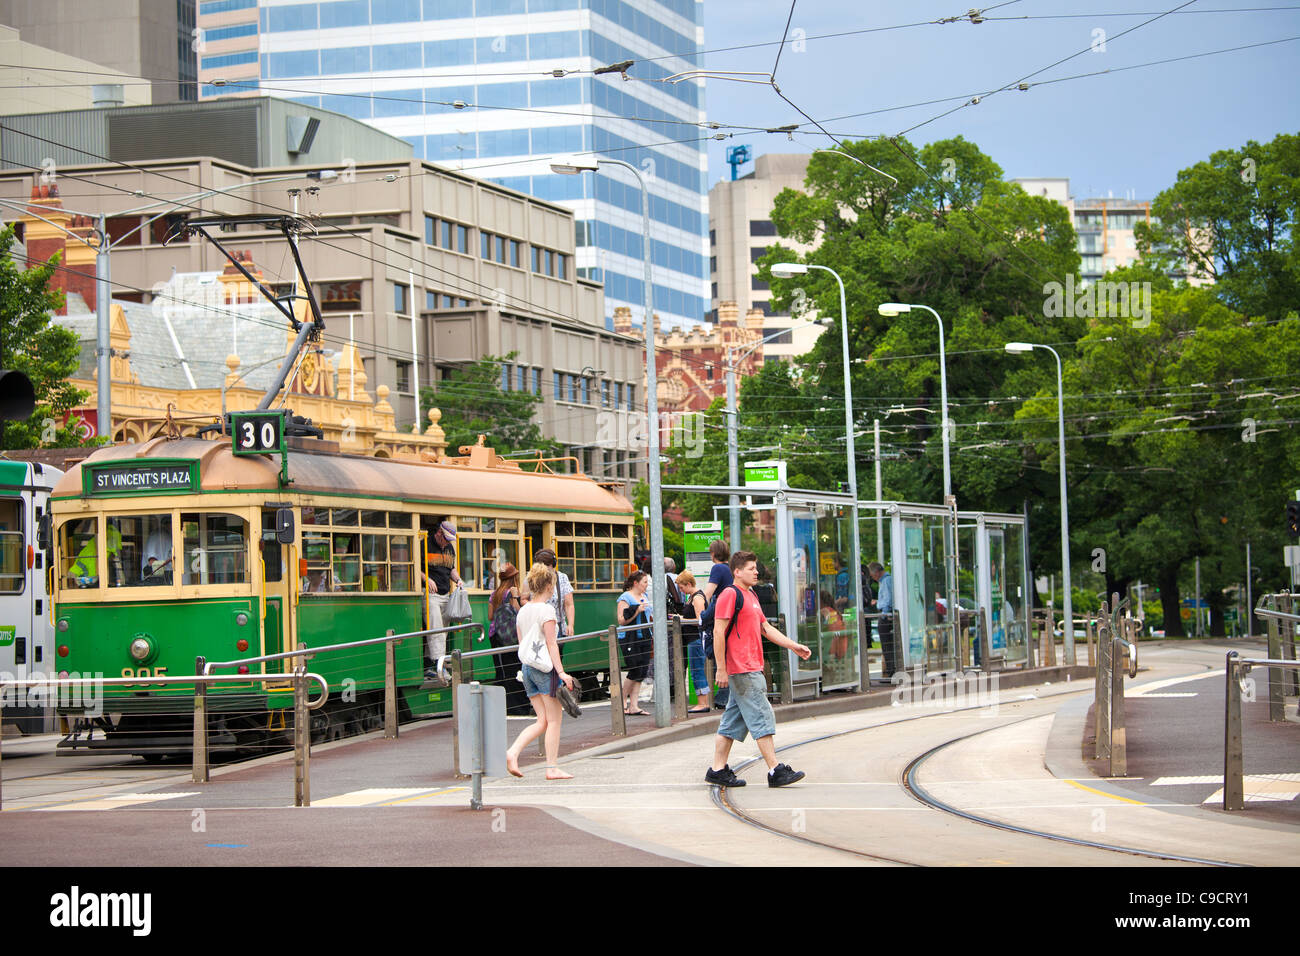 Sunny Melbourne day on the City public transport systems shown free tourist trams to the docklands. Stock Photo